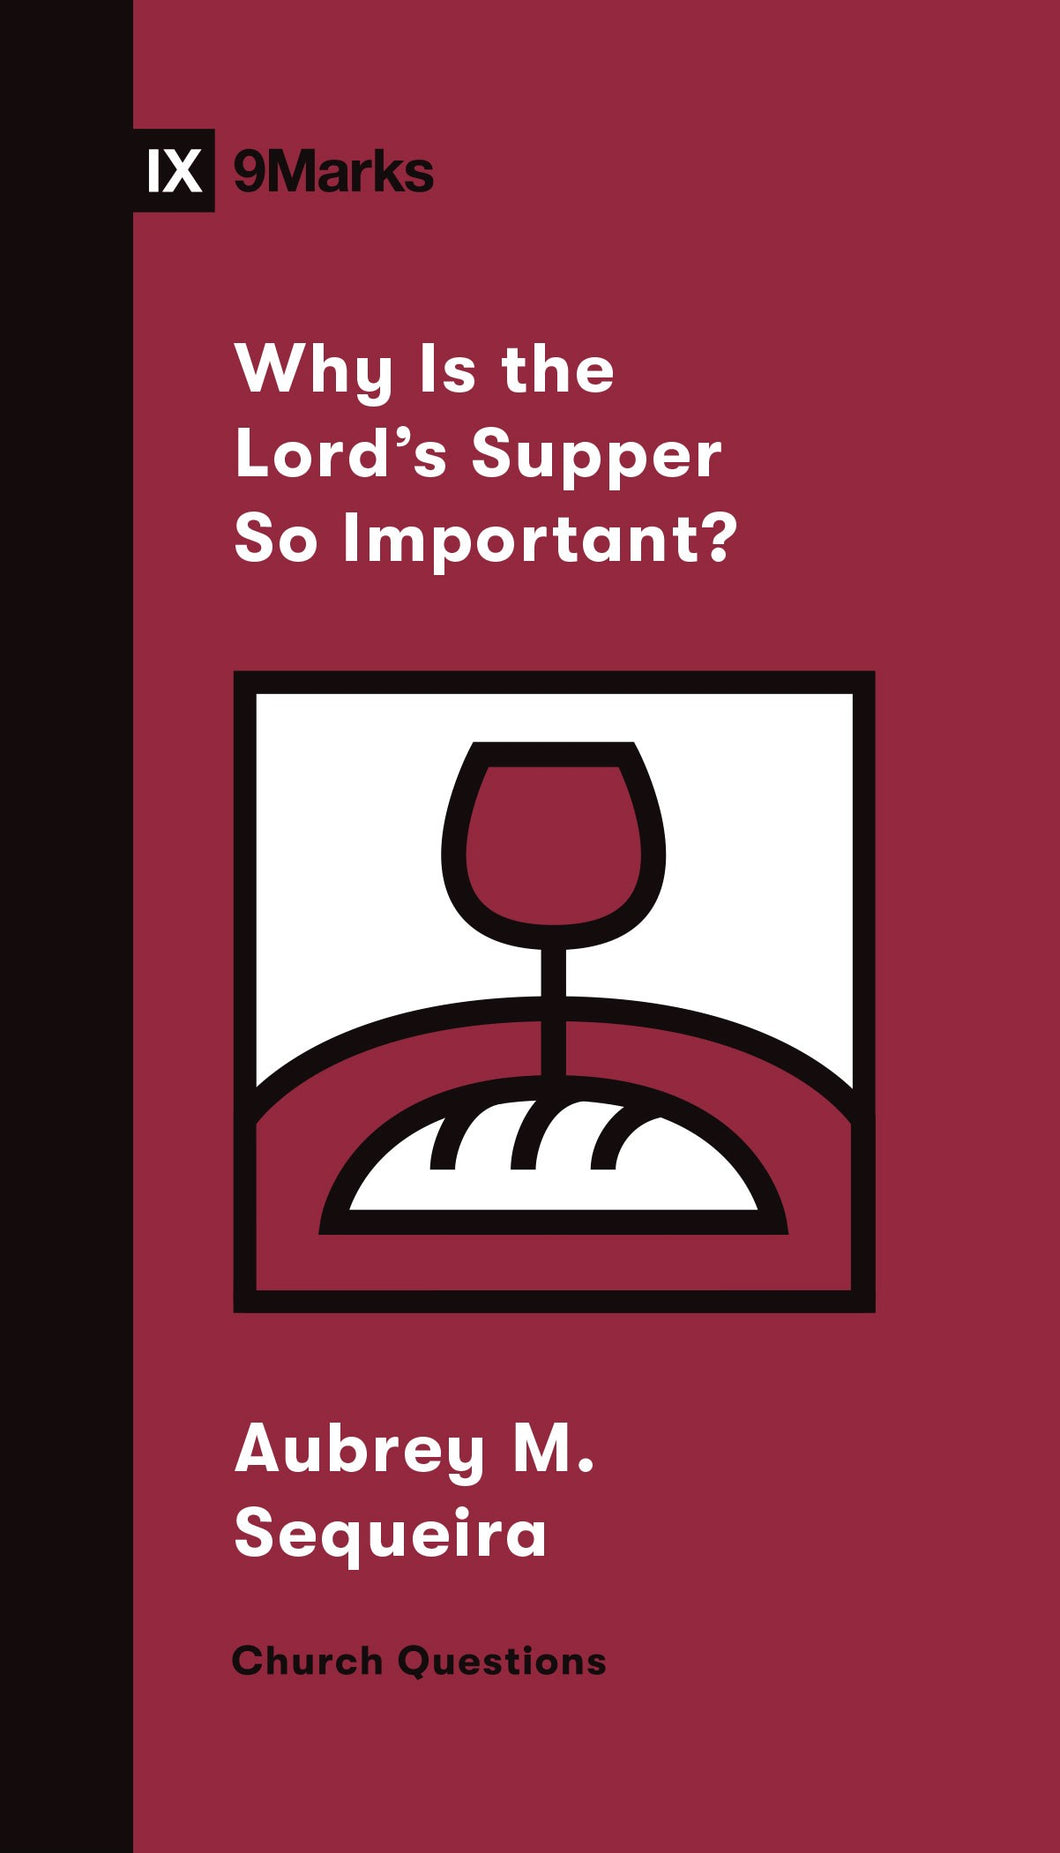 Why Is The Lord's Supper So Important? (9Marks: Church Questions)